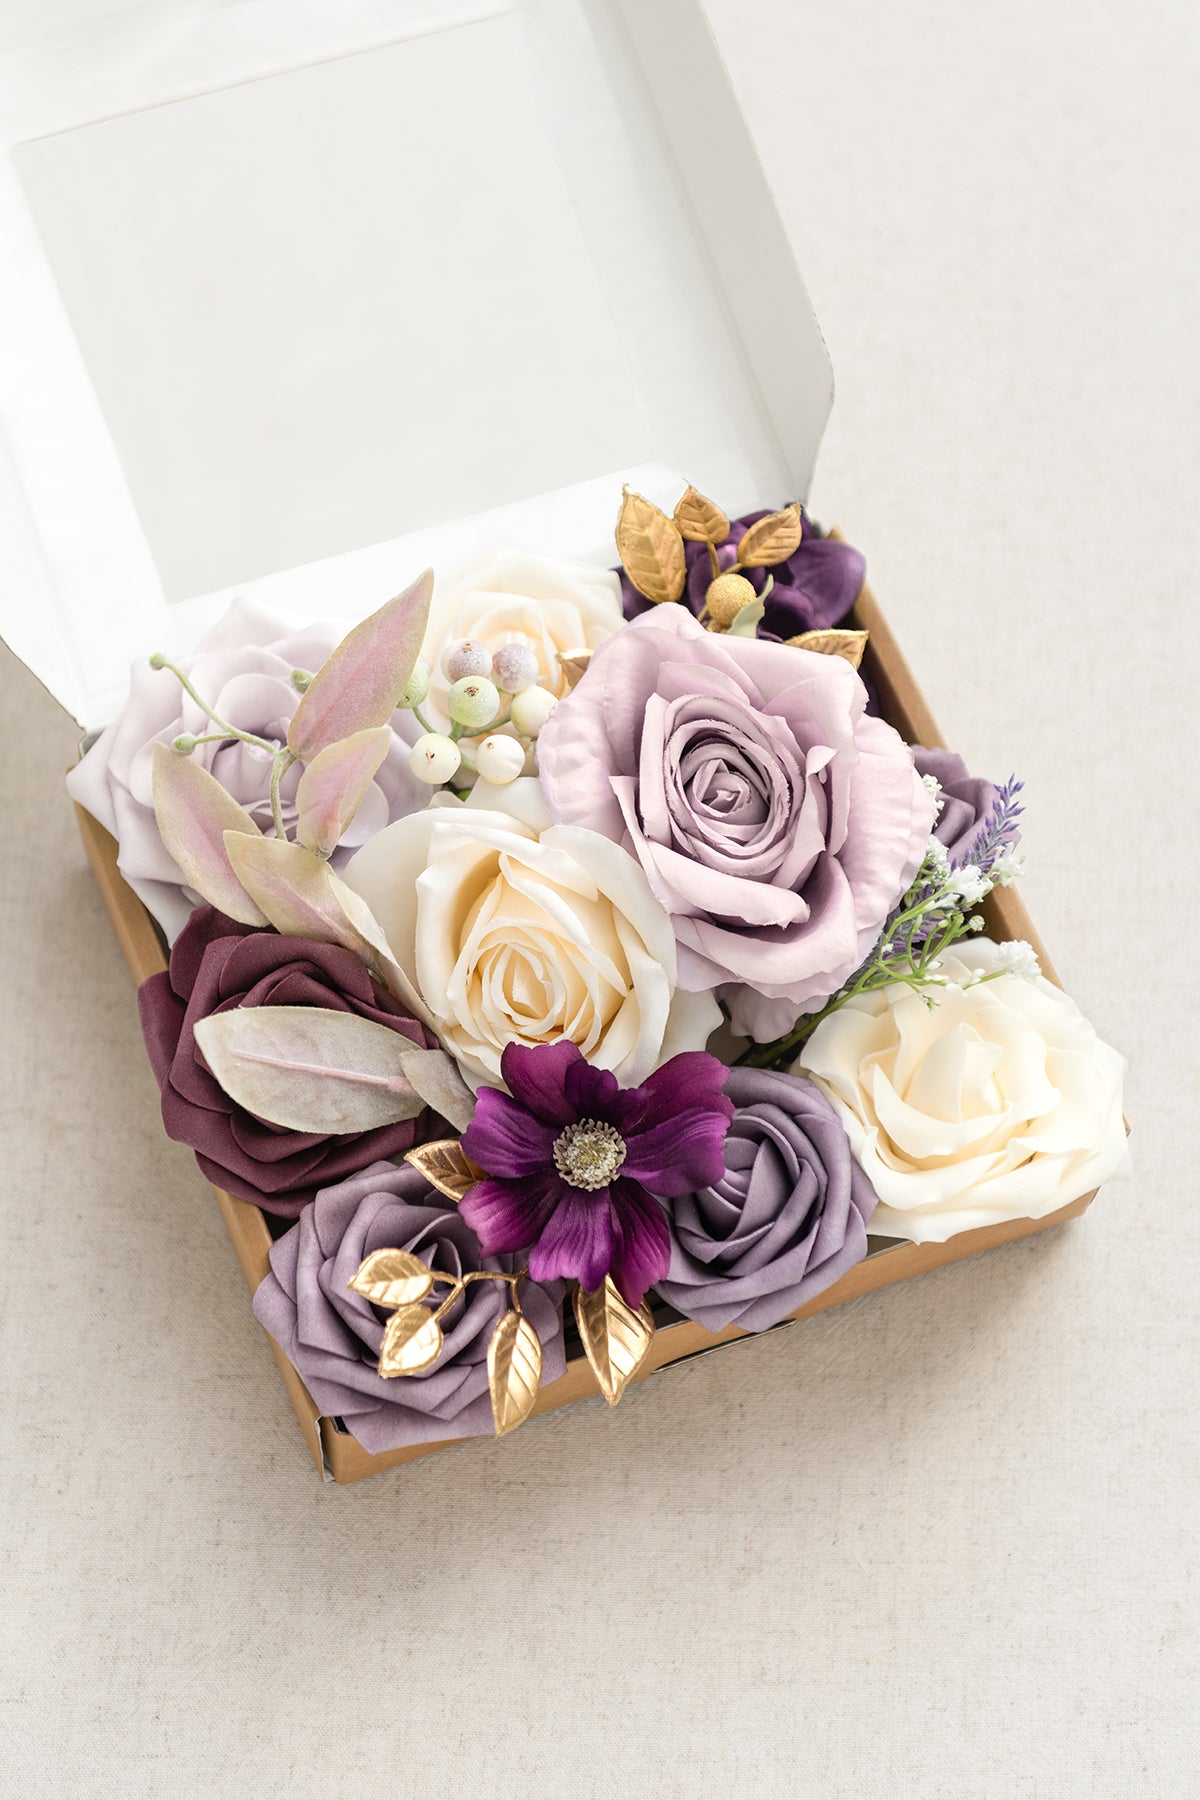 Sample Box in Lilac & Gold